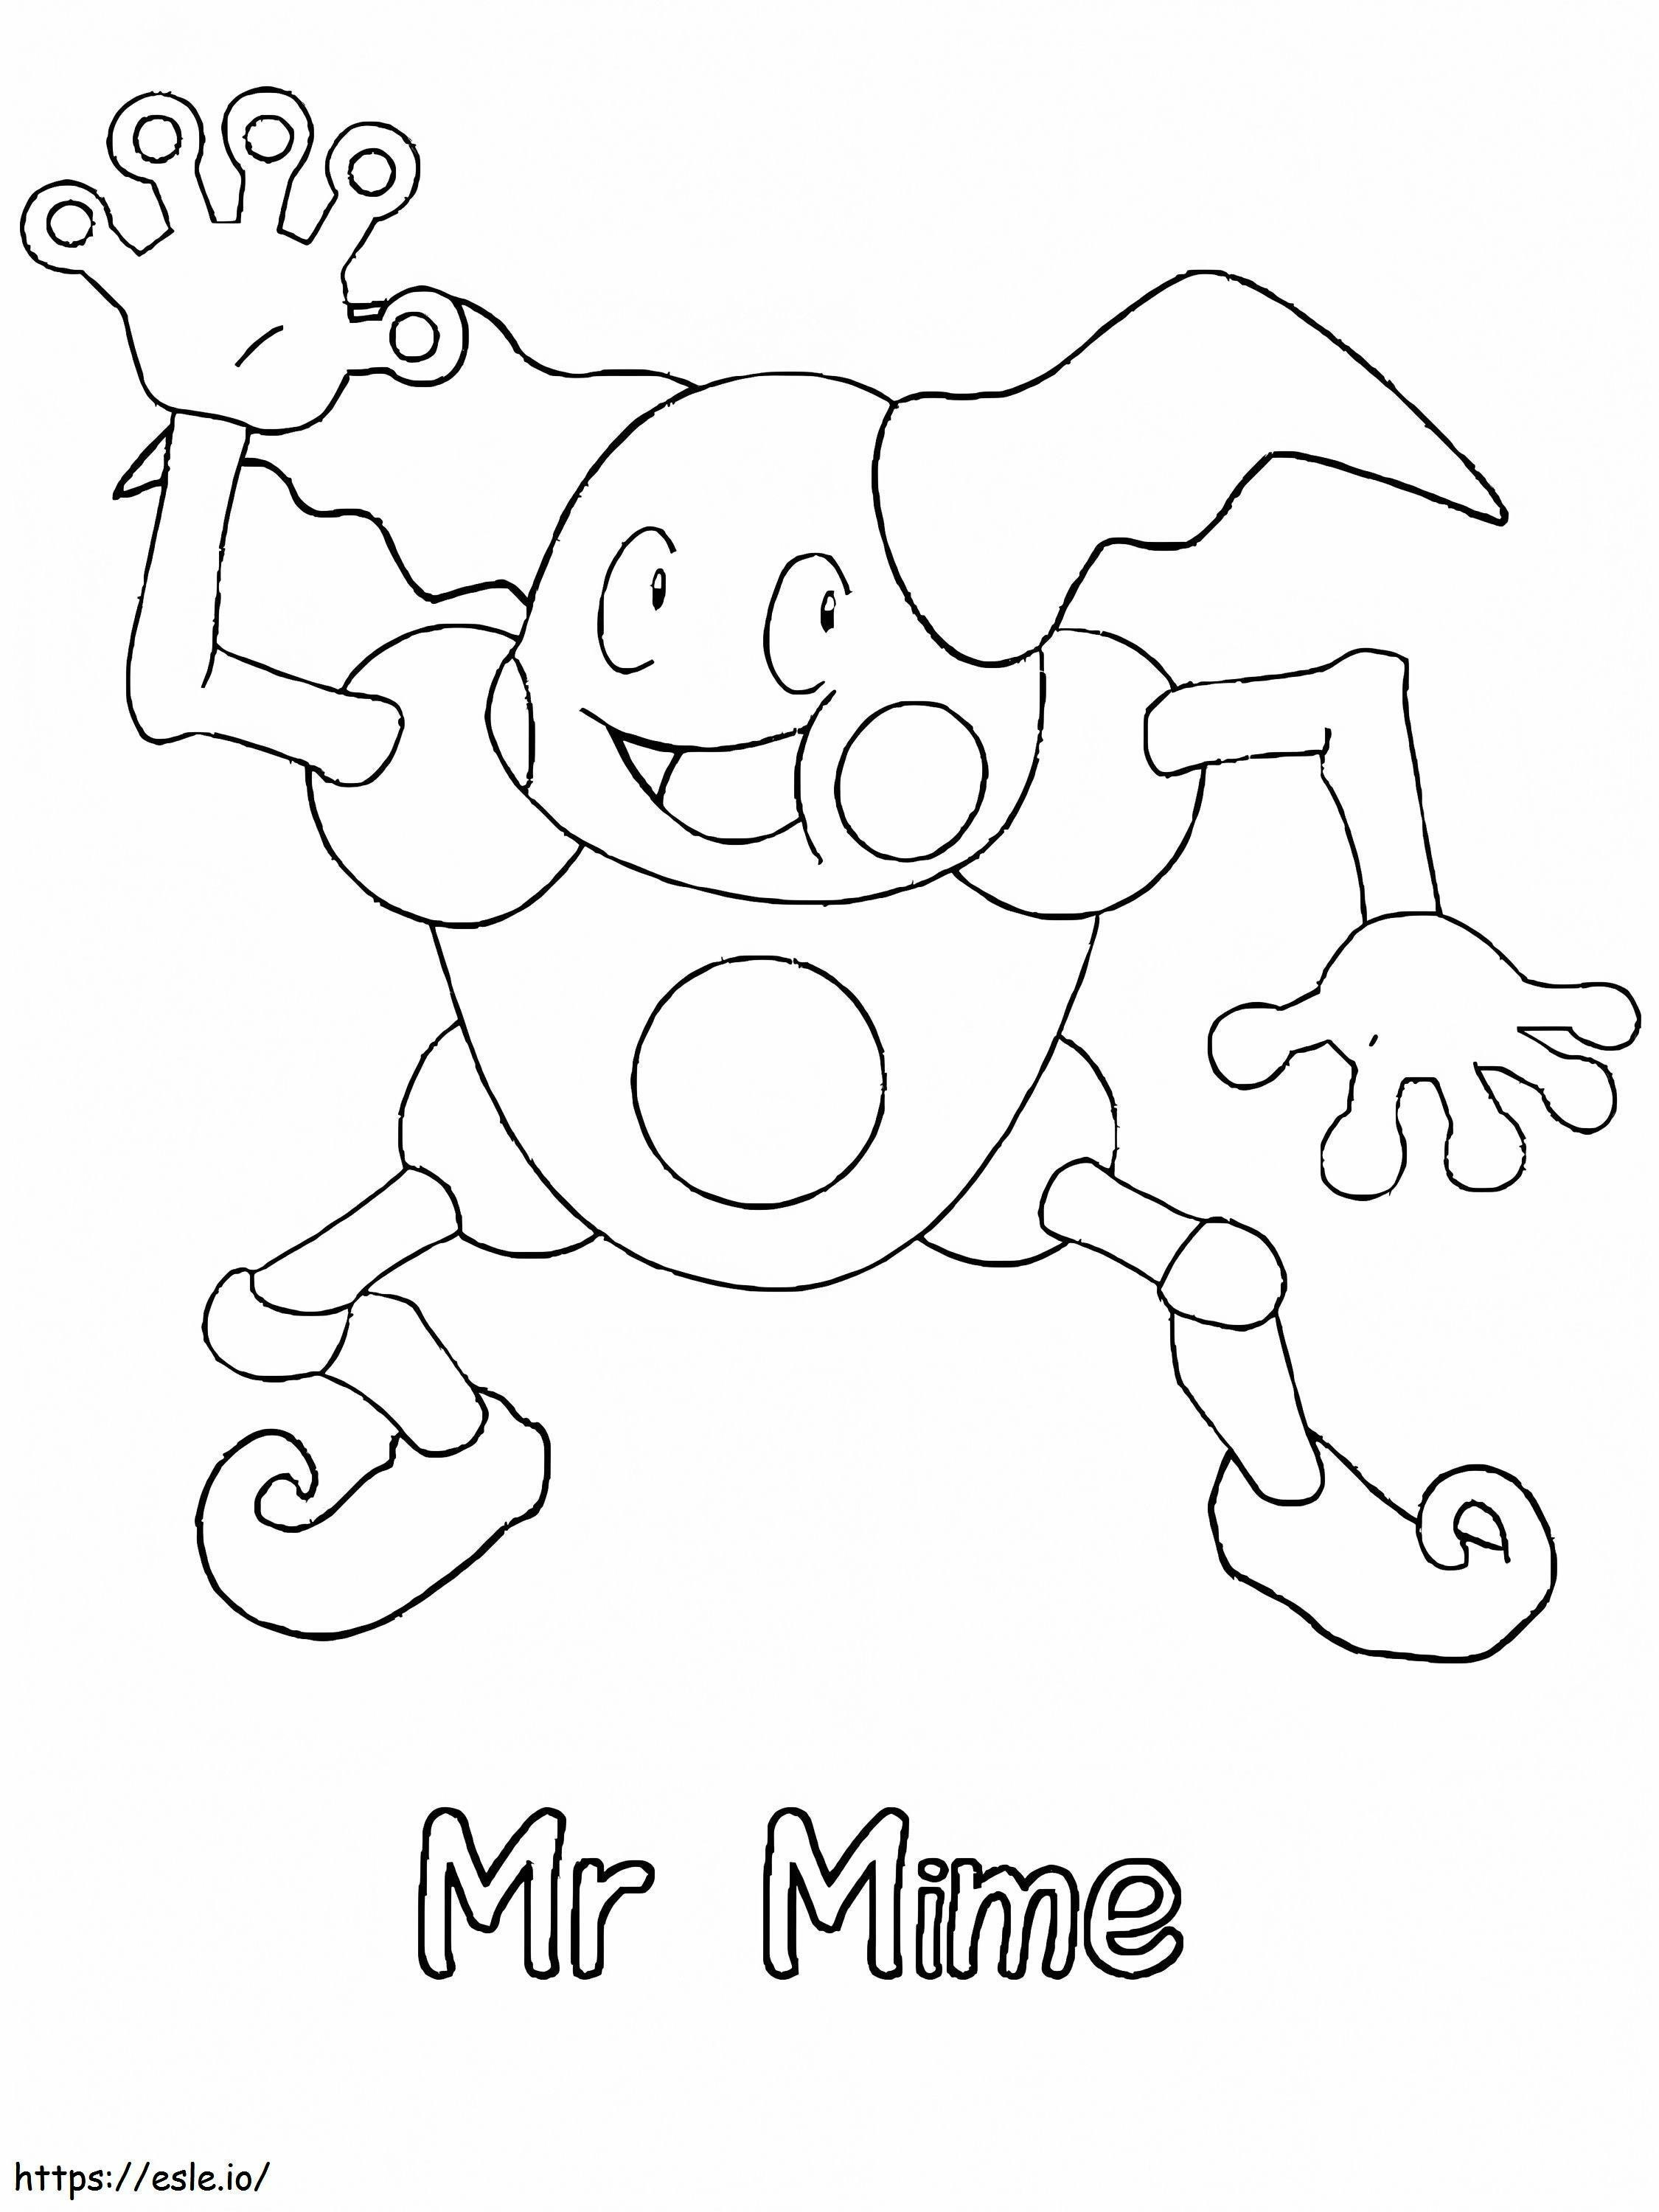 Mr. Mime 3 coloring page